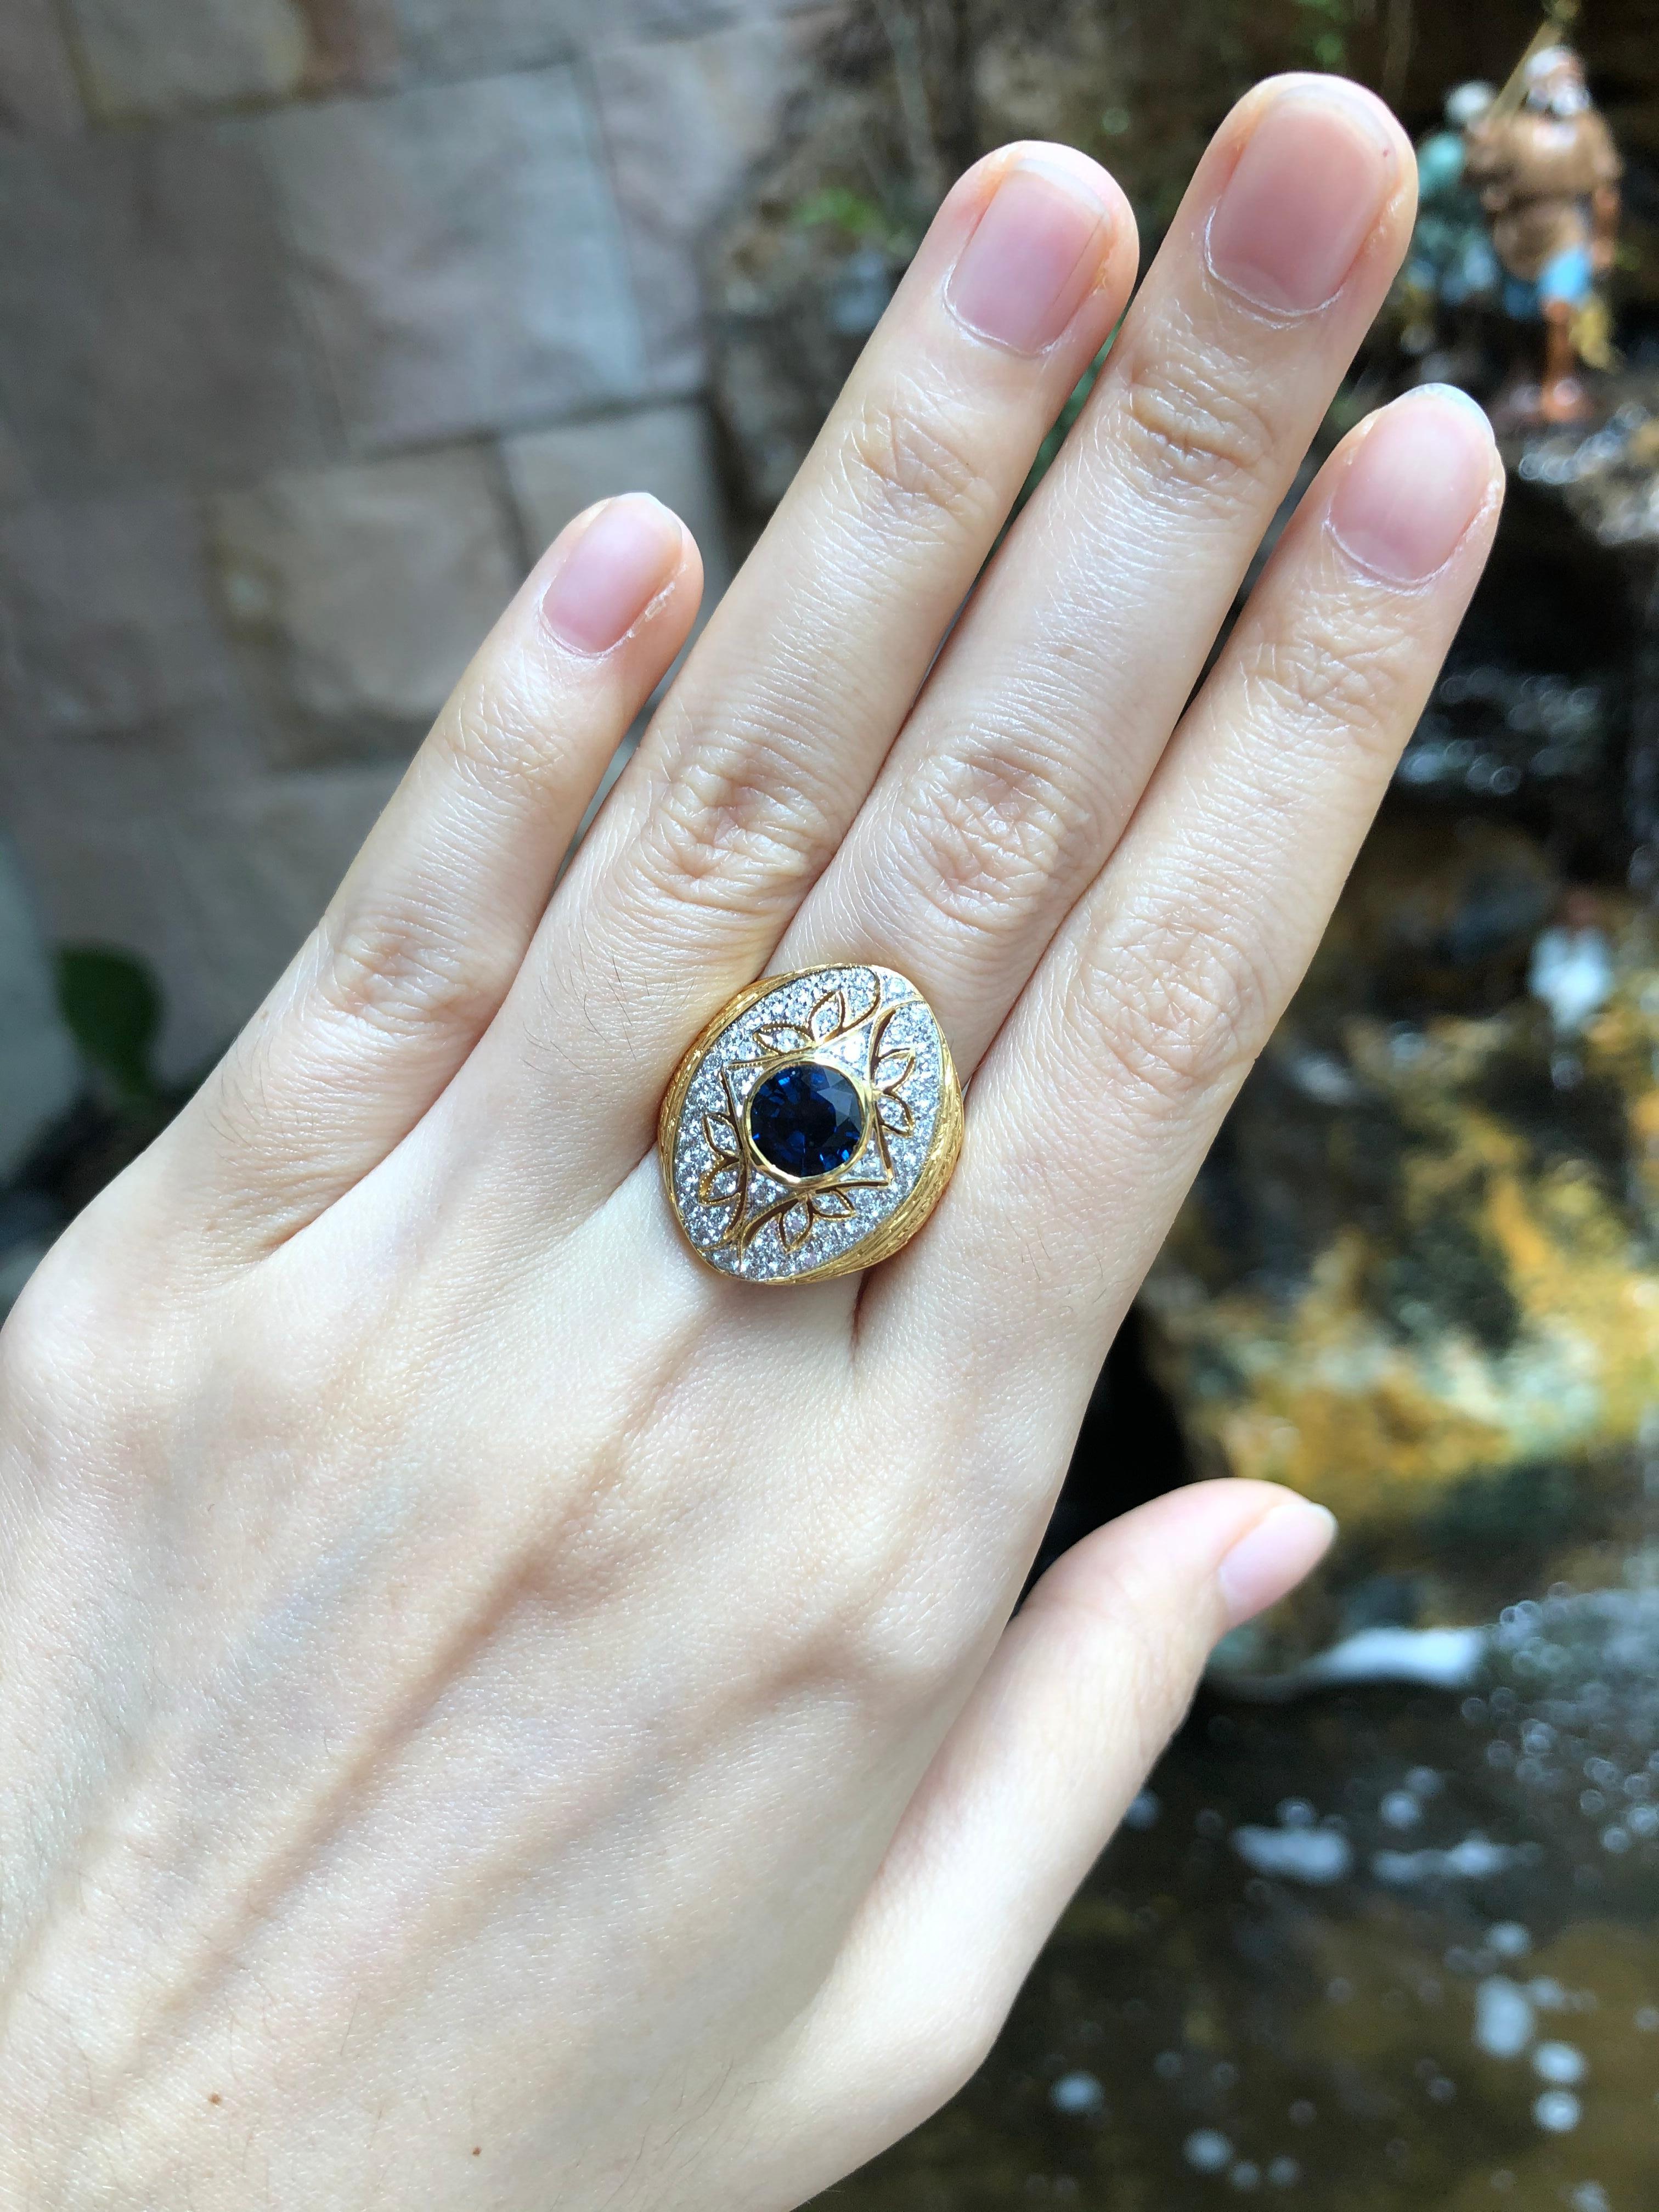 Blue Sapphire 1.81 carats with Diamond 0.73 carat Ring set in 18 Karat Gold Settings

Width:  1.7 cm 
Length: 2.4 cm
Ring Size: 57
Total Weight: 11.14 grams

